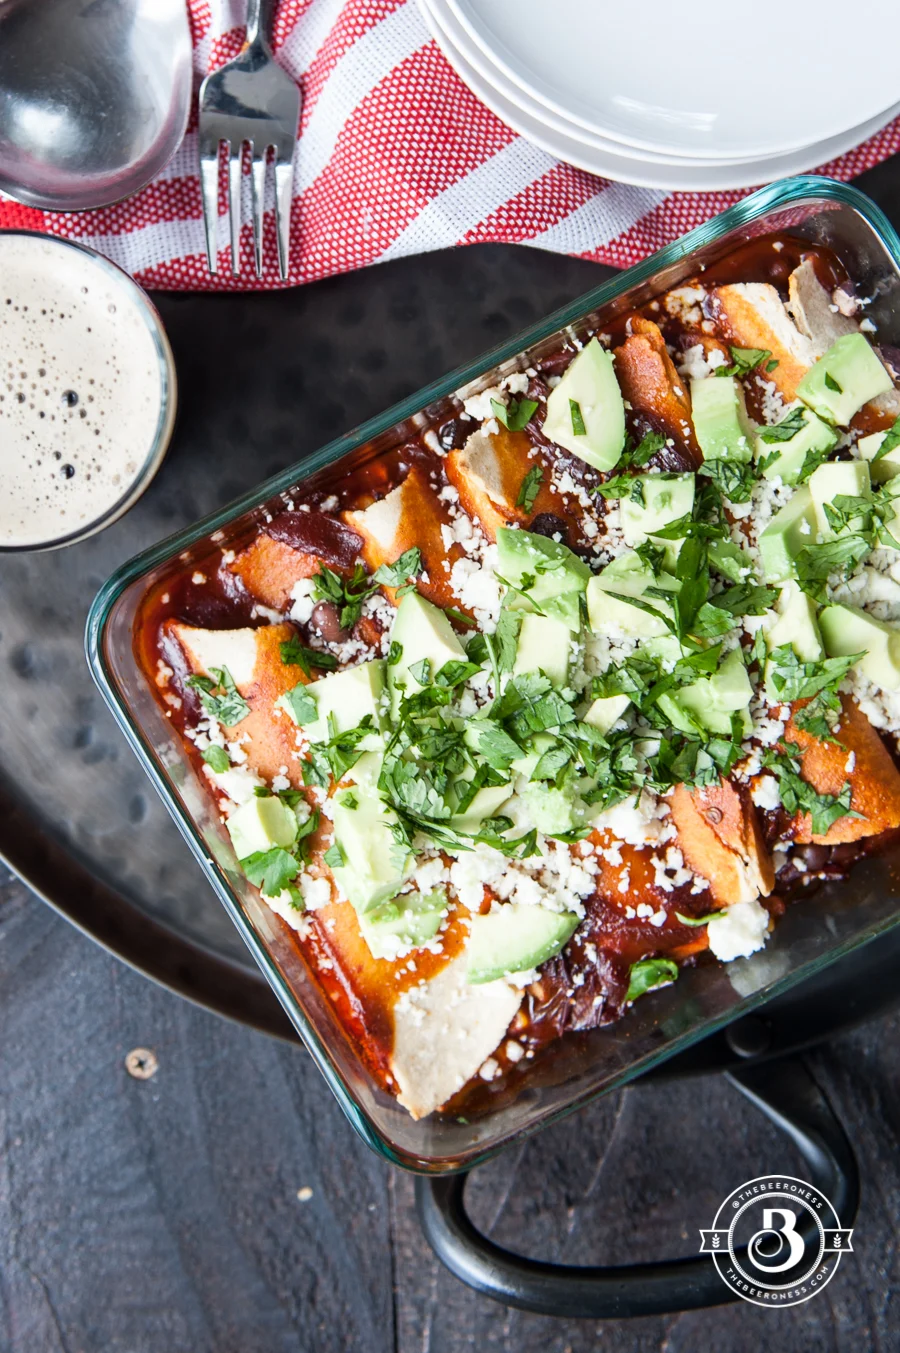 Corn and Black Bean Enchiladas with Chipotle Stout Red Sauce + 26 Recipes for a Vegetarian Cinco de Mayo